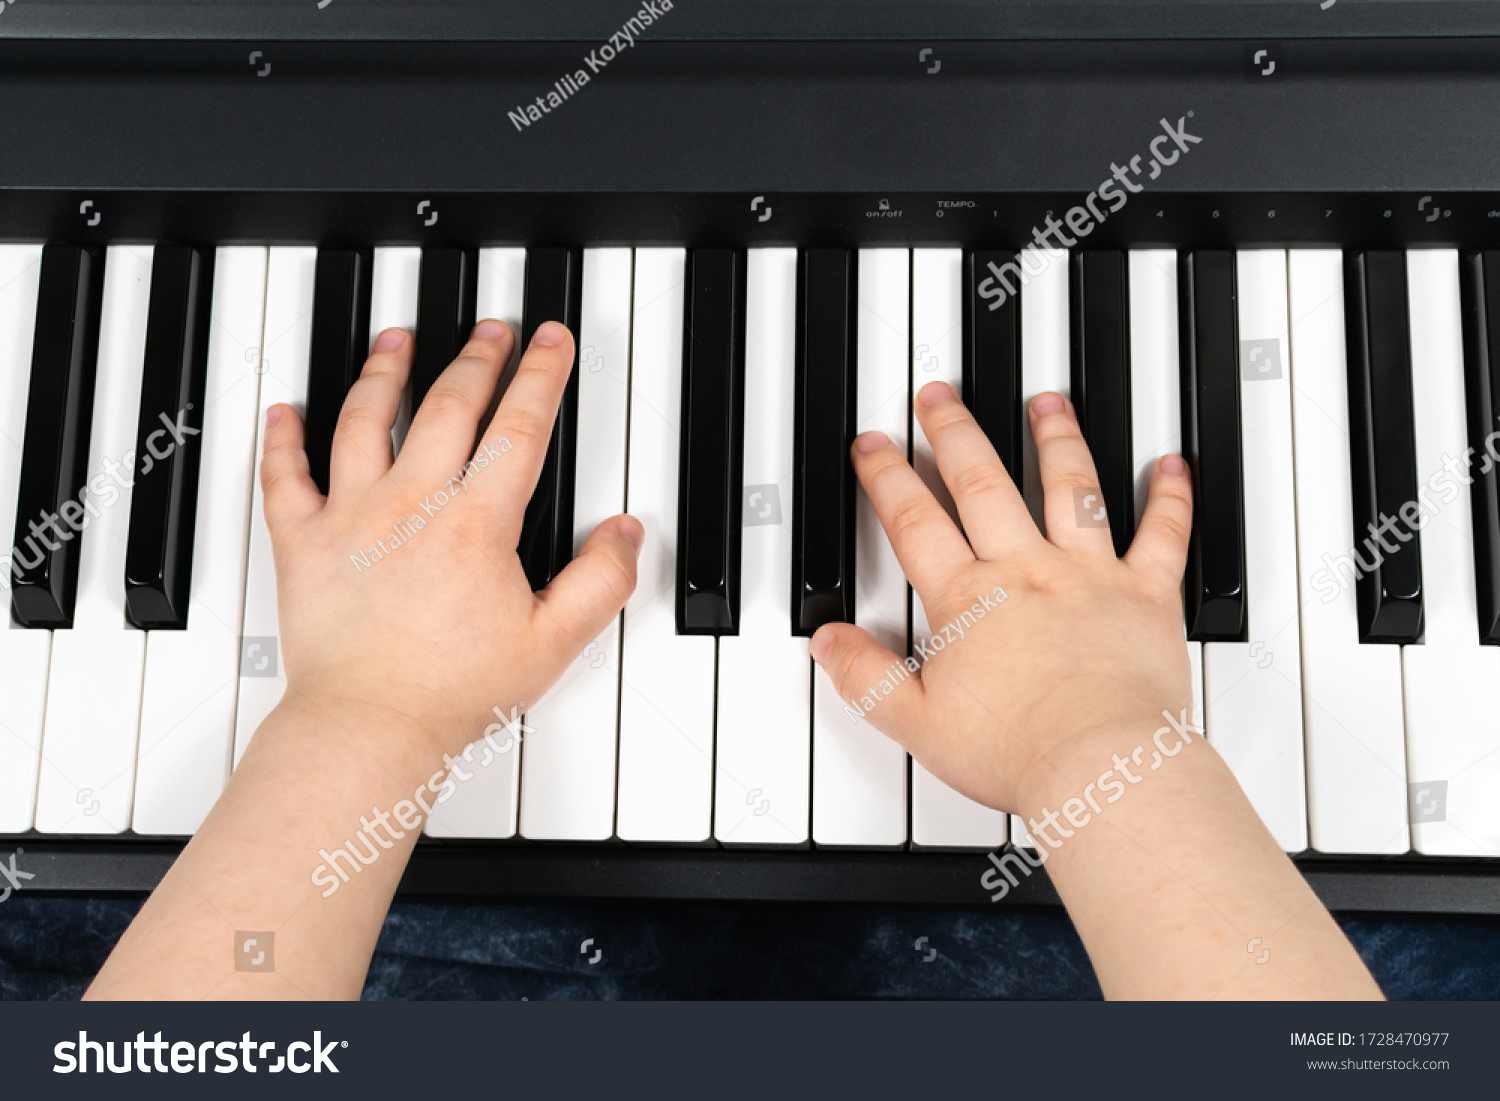 Hands of a young child playing the piano. Learning to play the piano. Studying at home. To stay home. View from above. #1728470977